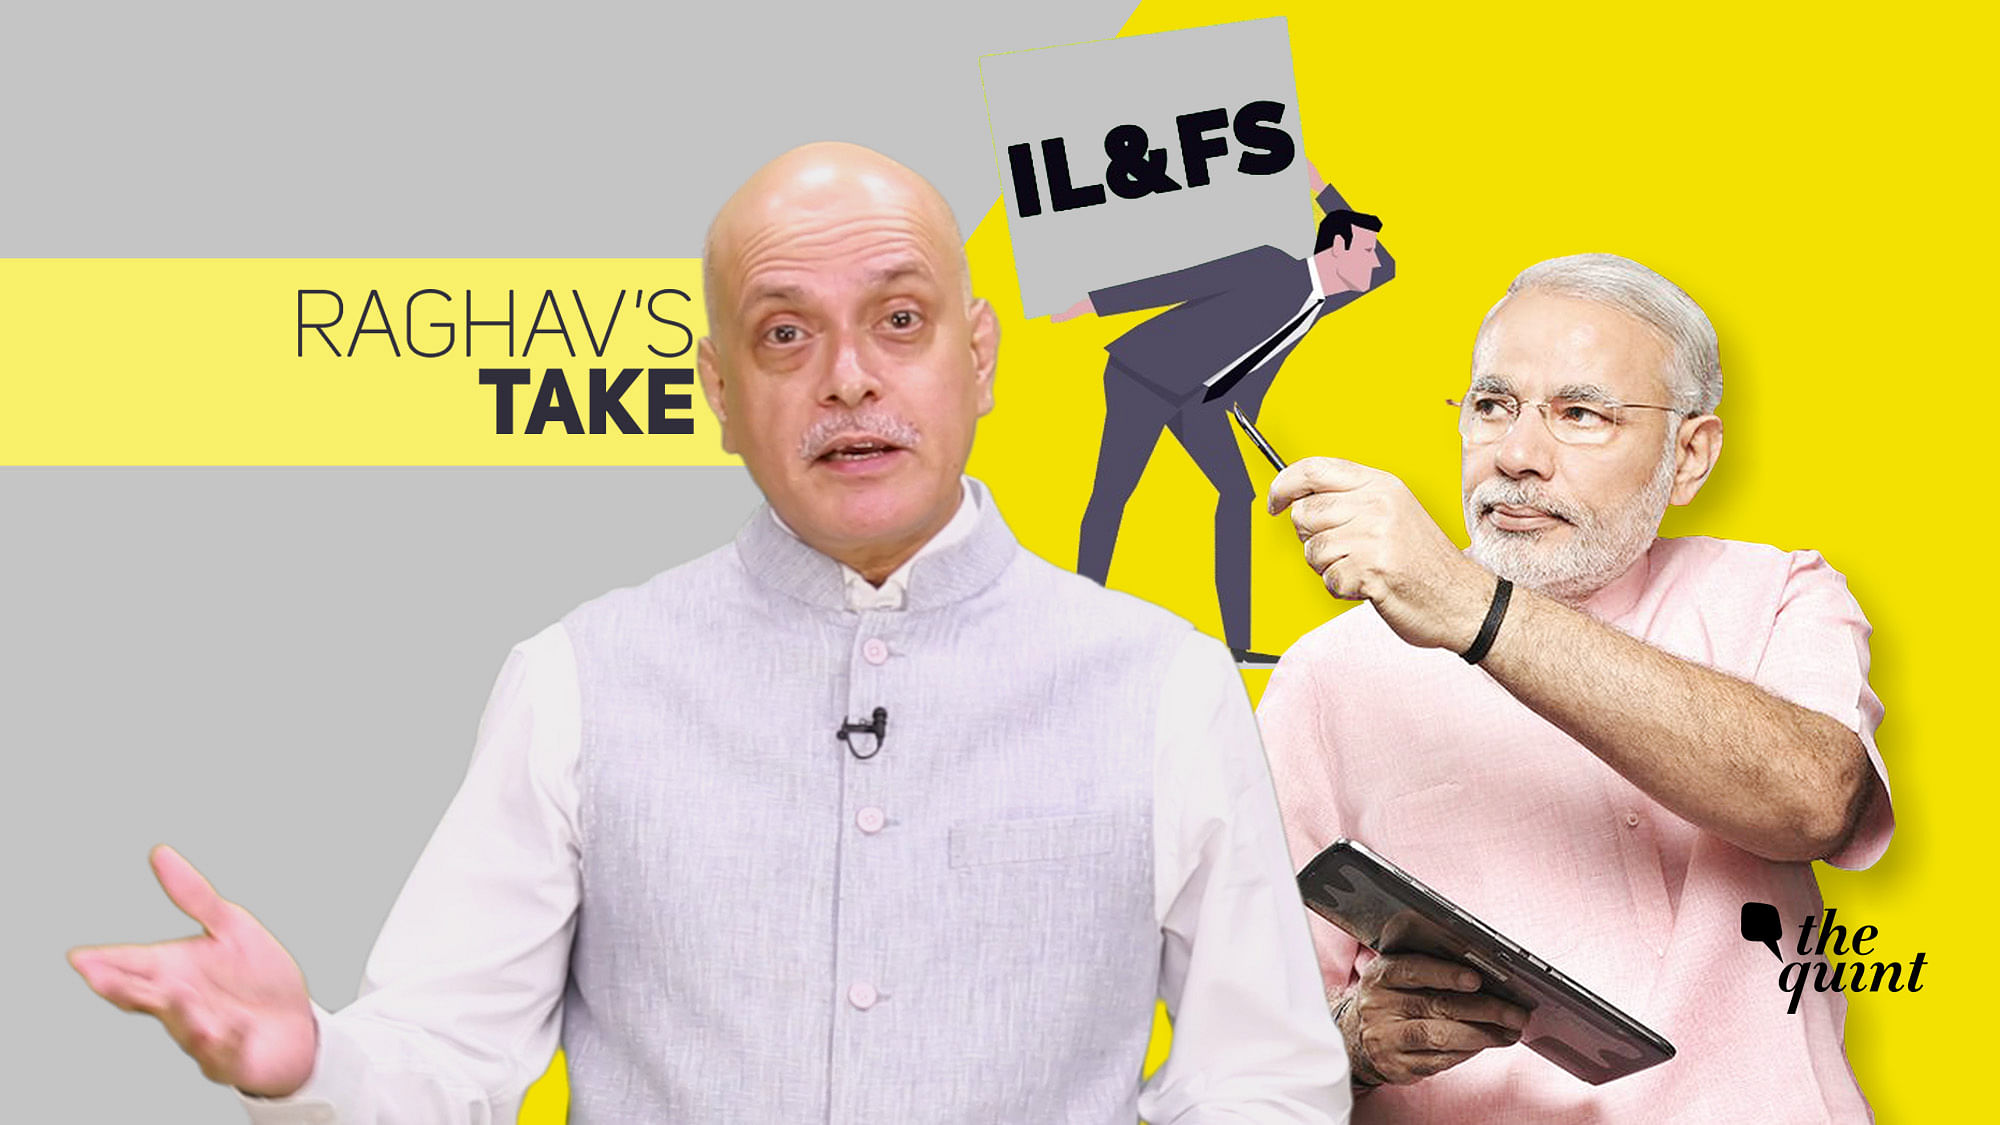 I have enough empirical ammunition to prove that an Indian TARP would enhance economic welfare; it would benefit ordinary citizens and deliver a sharp blow to cronyism, writes Raghav Bahl.